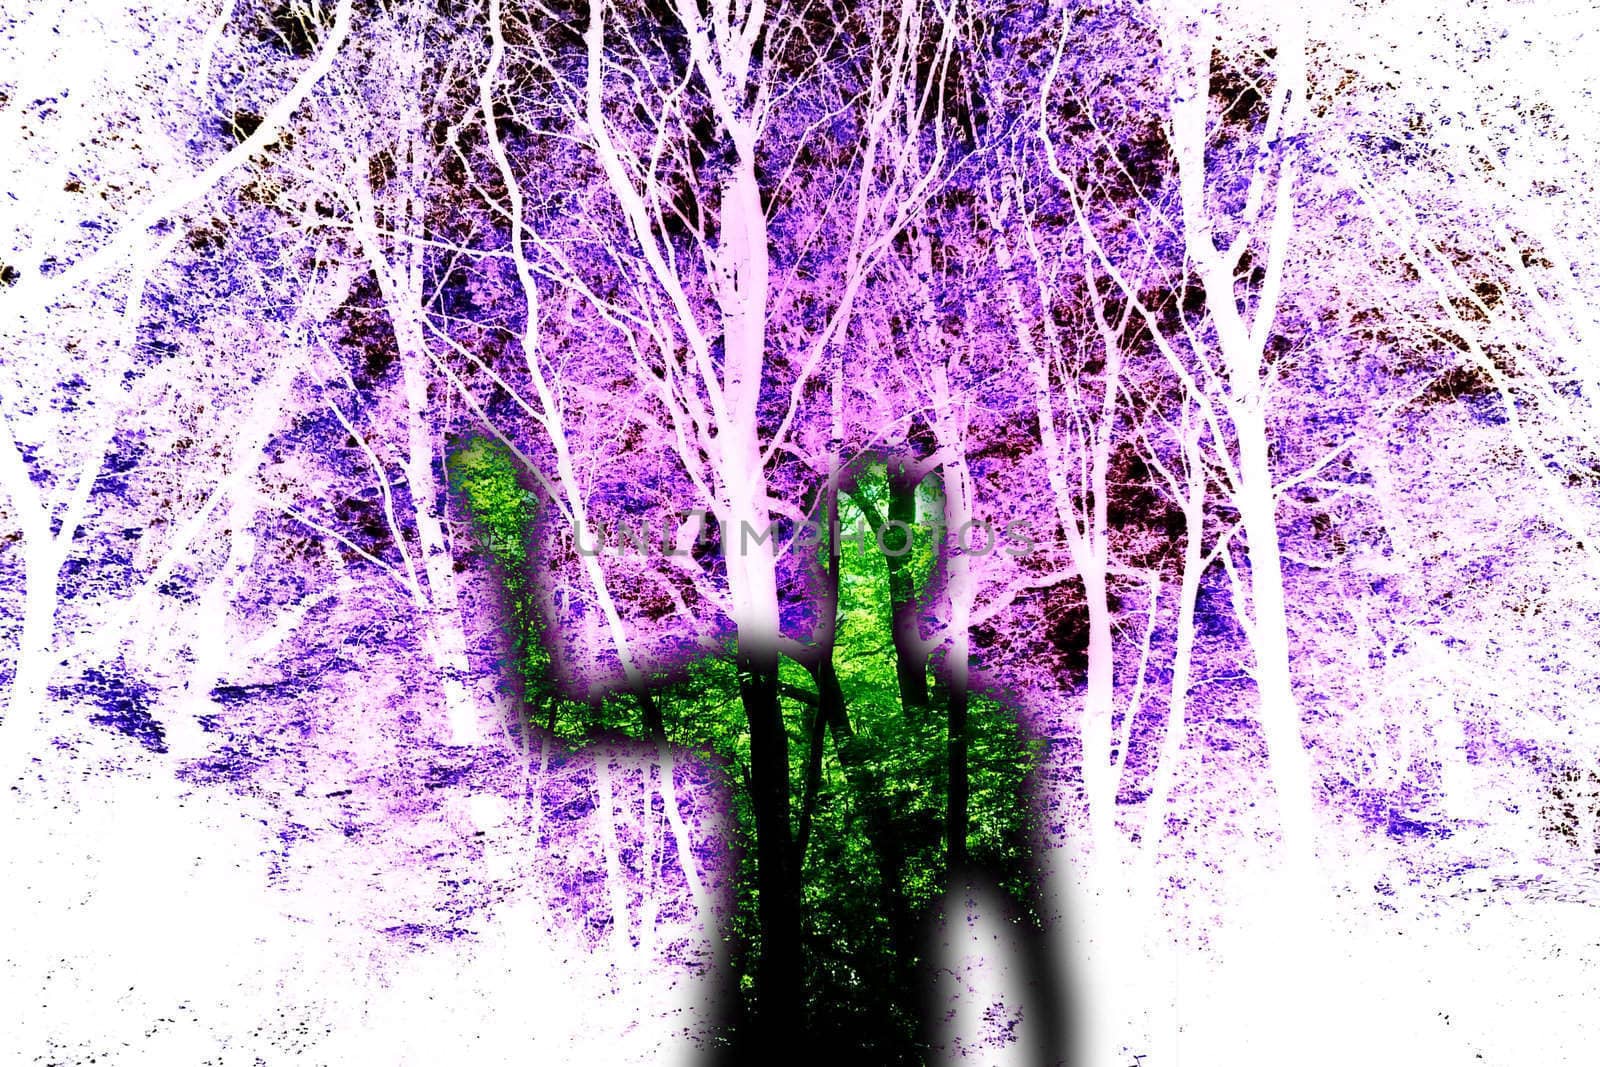 A representation of a ghost in some dark woods.